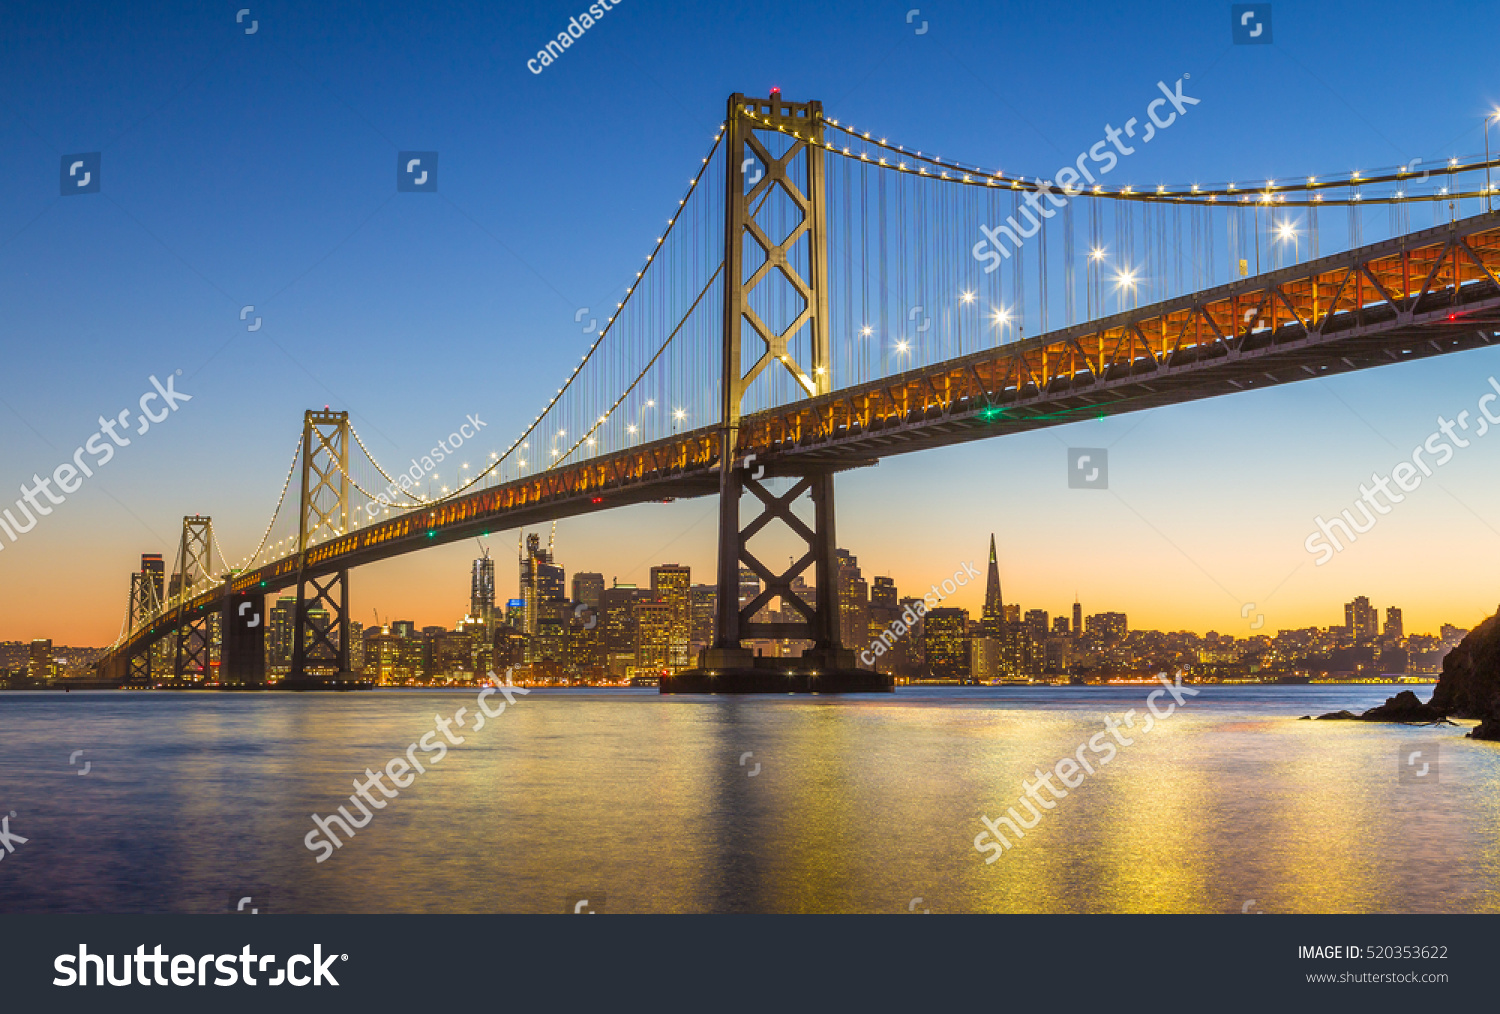 Classic panoramic view of famous Oakland Bay Bridge with the skyline of San Francisco in the background illuminated in beautiful twilight after sunset in summer, California, USA #520353622